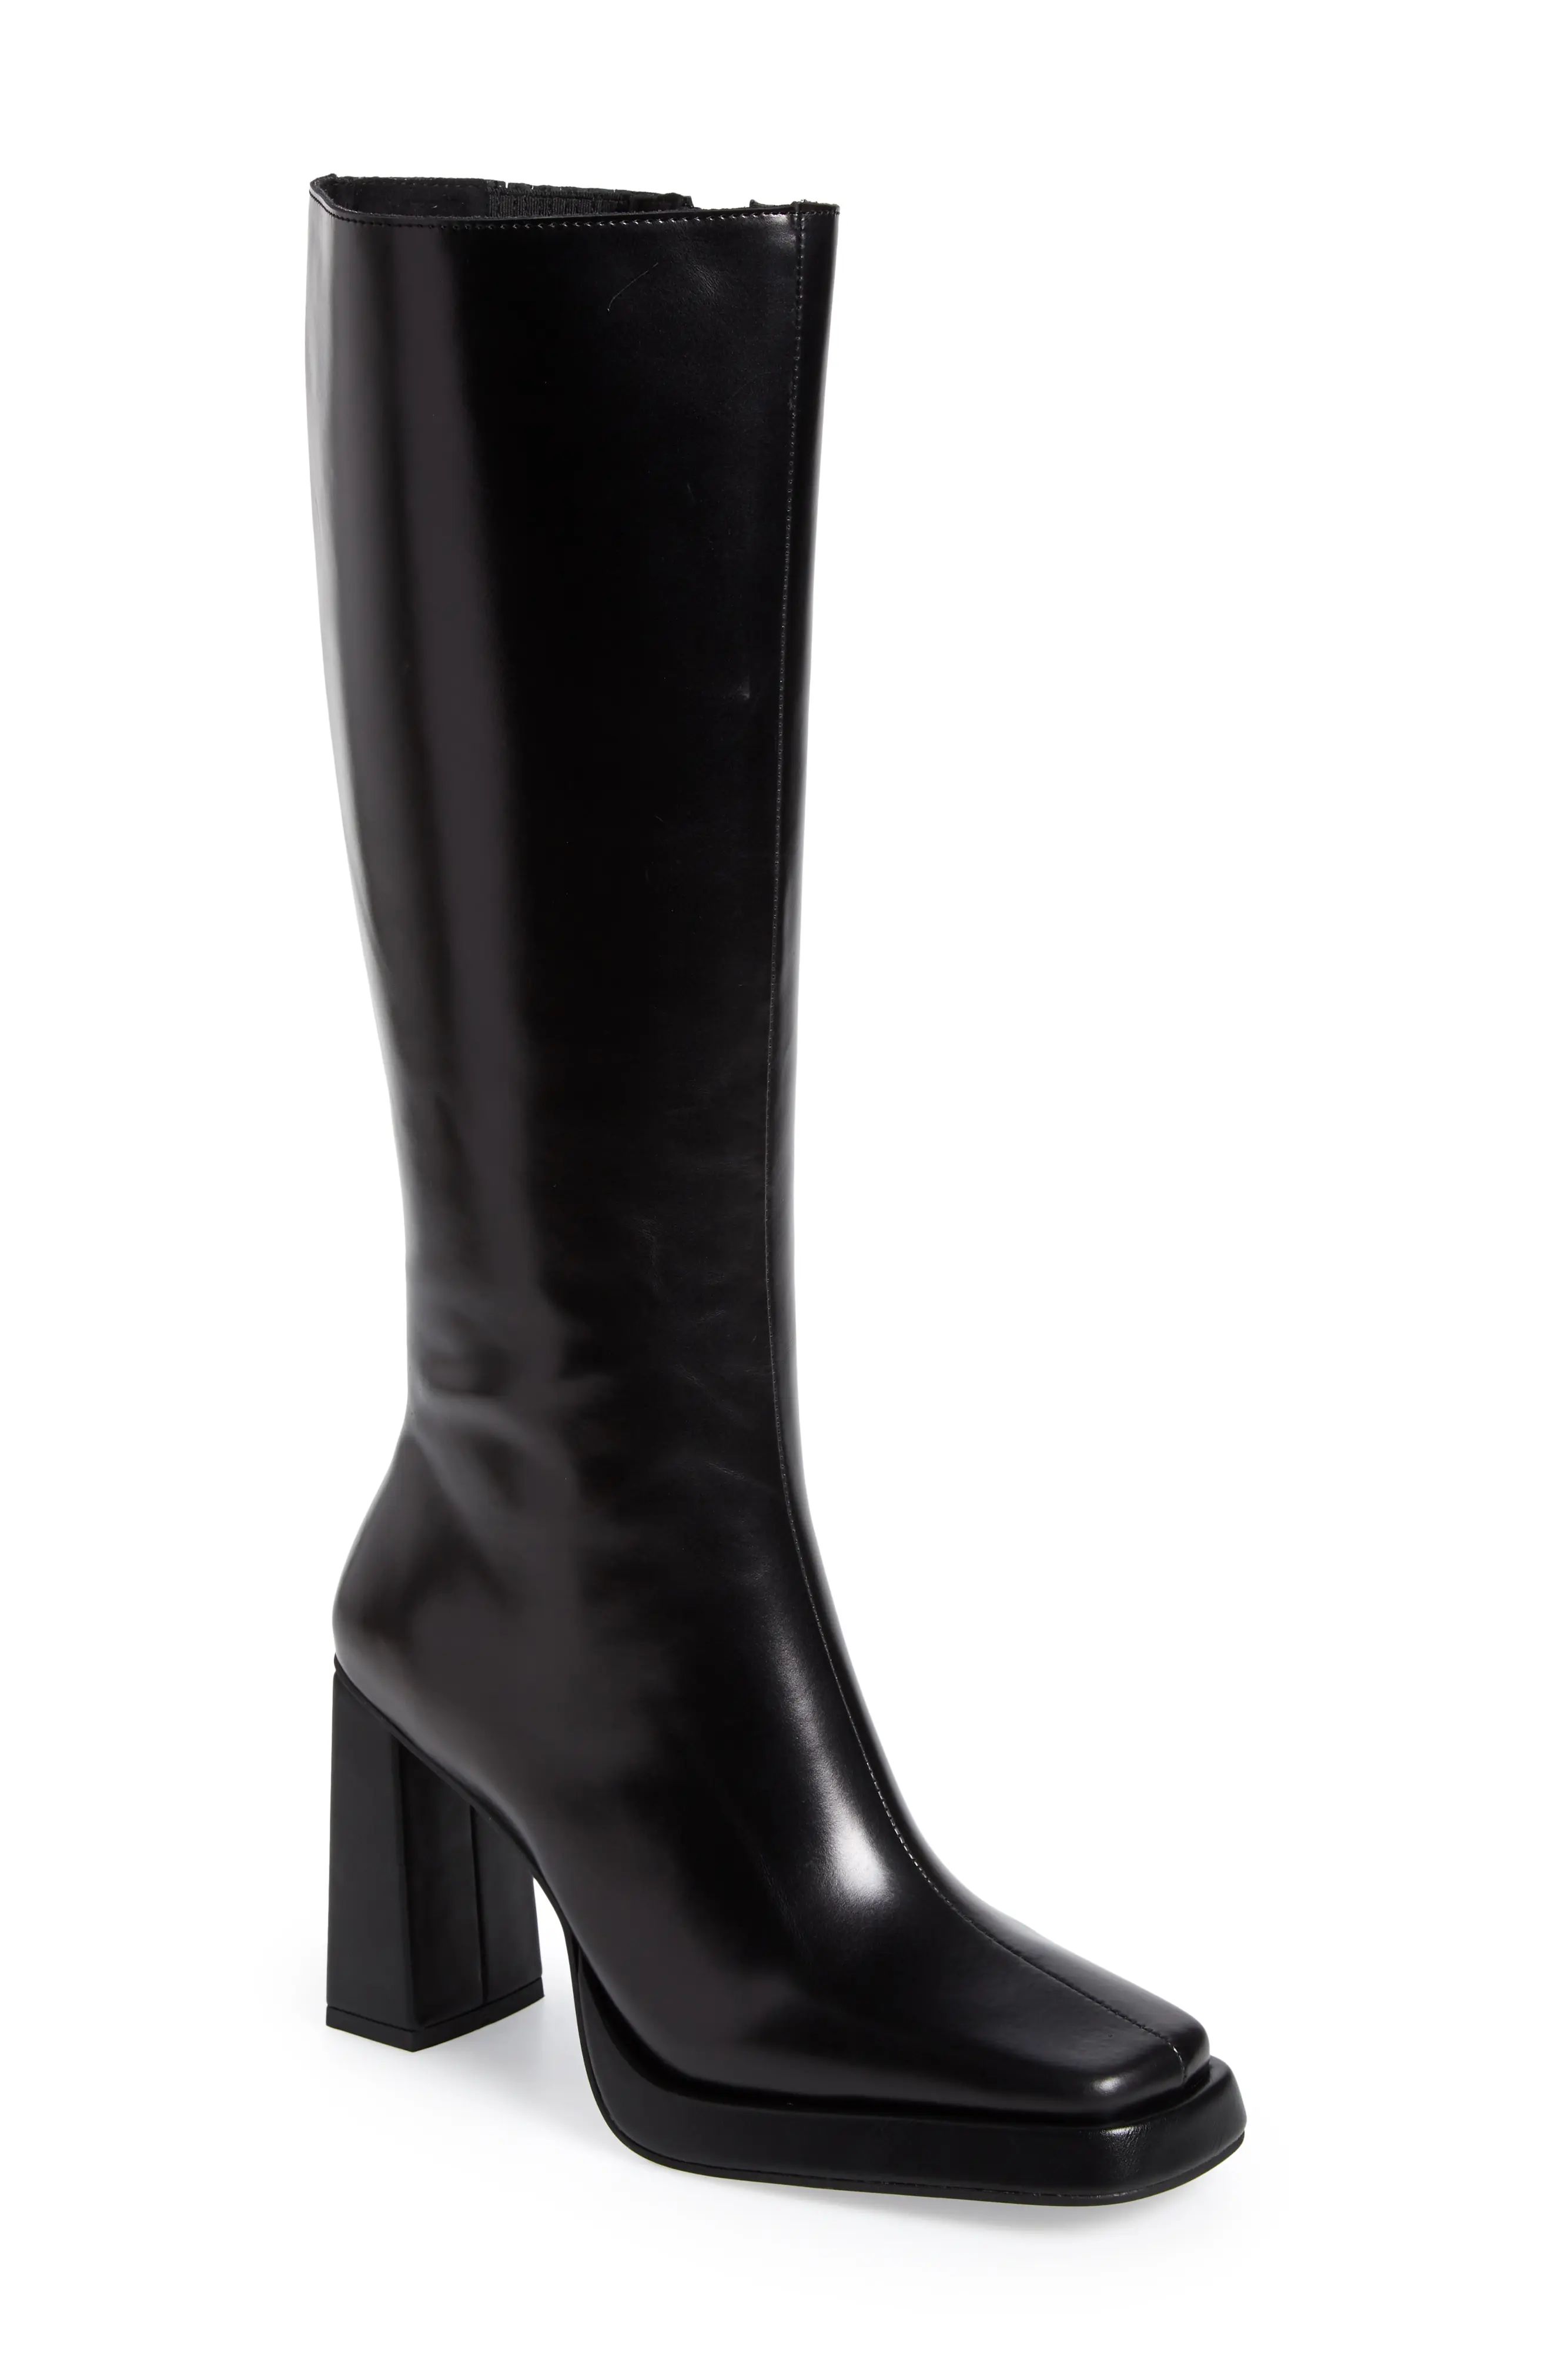 Jeffrey Campbell Maximal Knee High Boot in Black at Nordstrom, Size 7 | Nordstrom